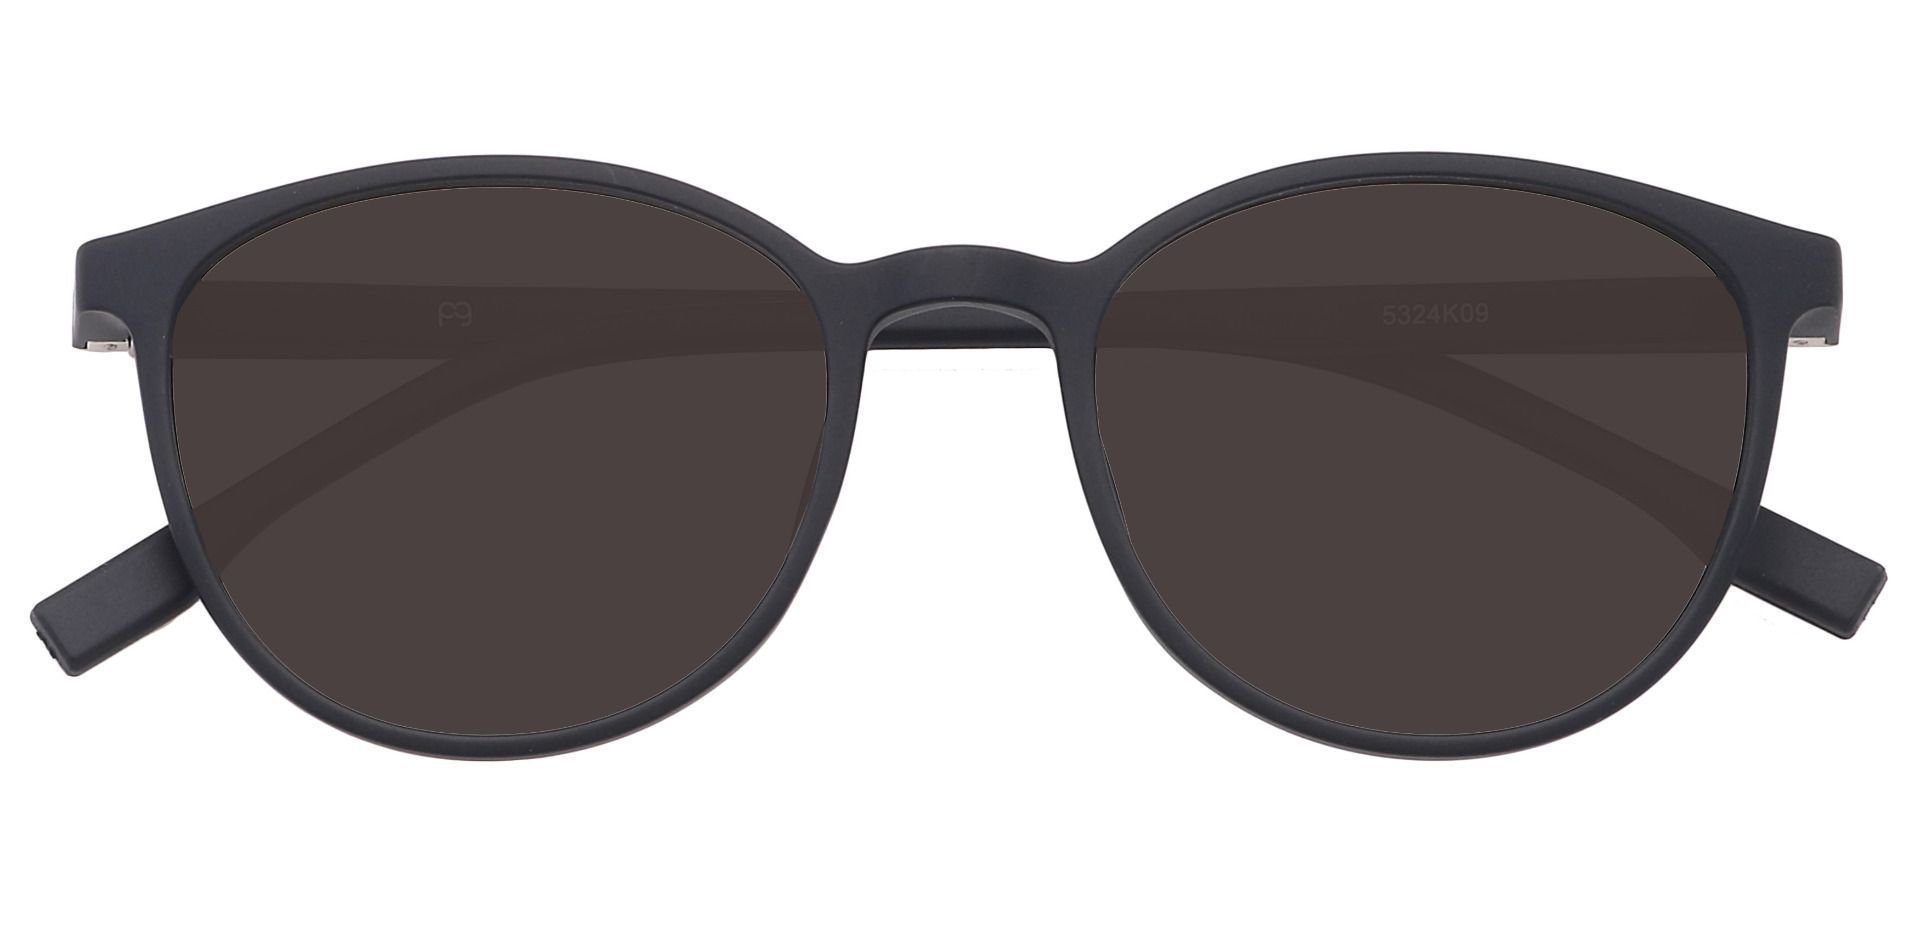 Bay Round Lined Bifocal Sunglasses - Black Frame With Gray Lenses